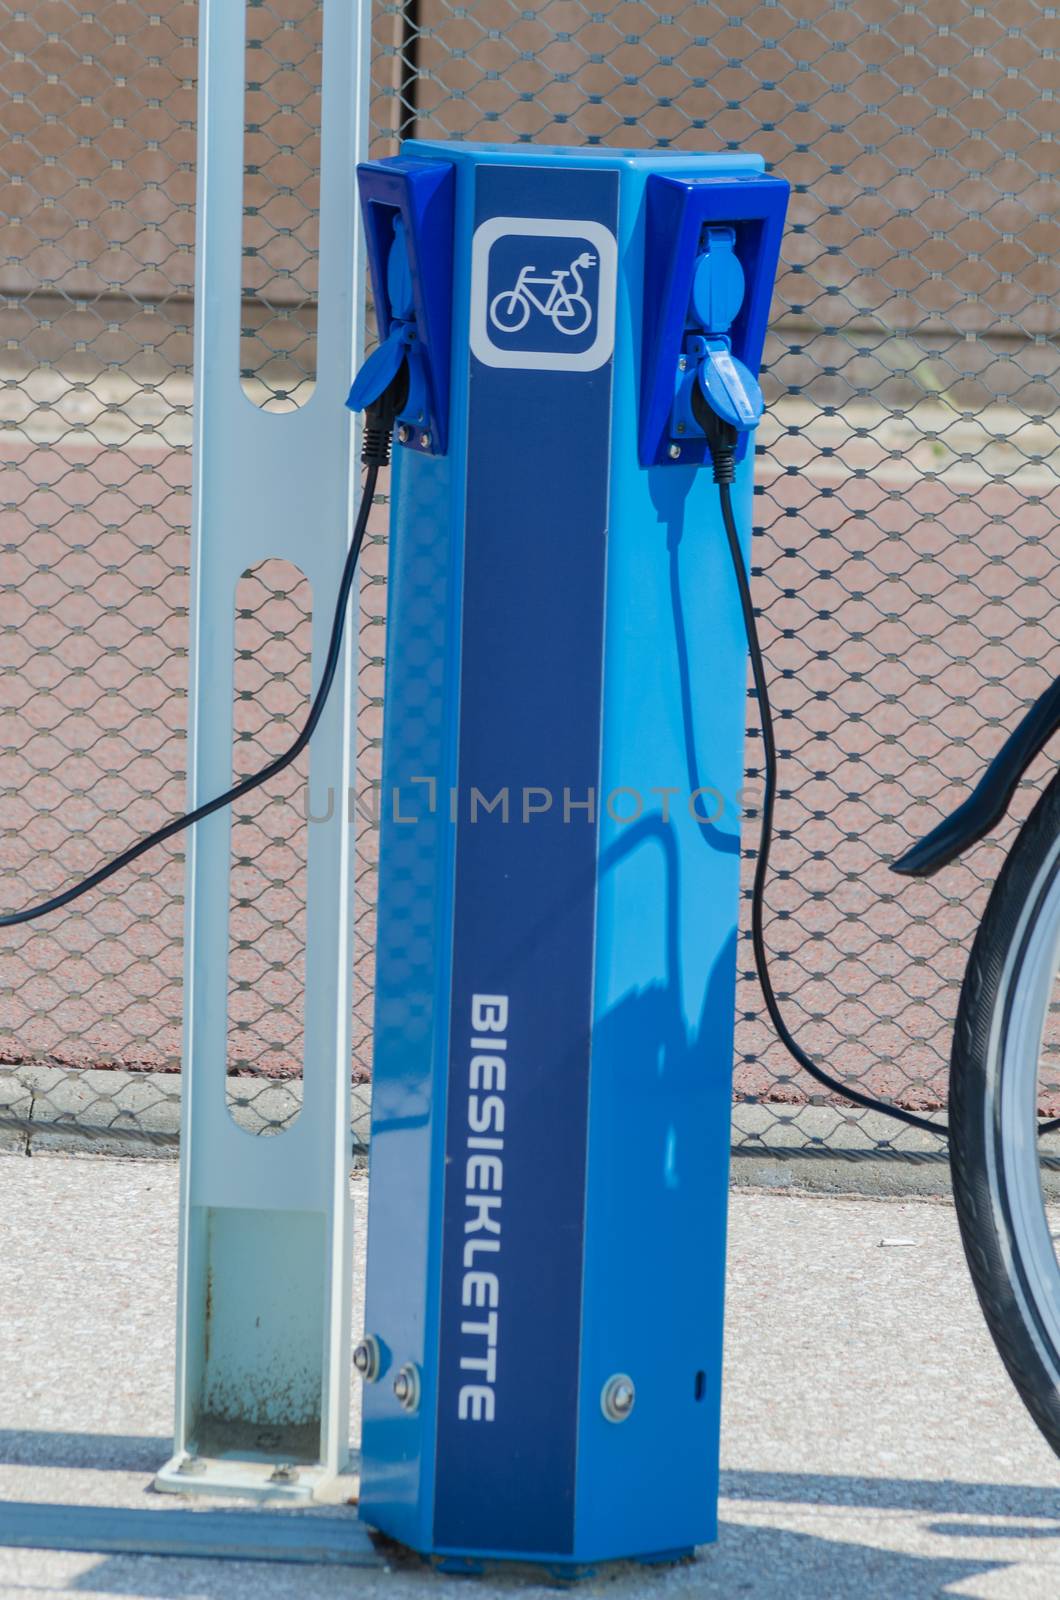 E-bike charging station by JFsPic